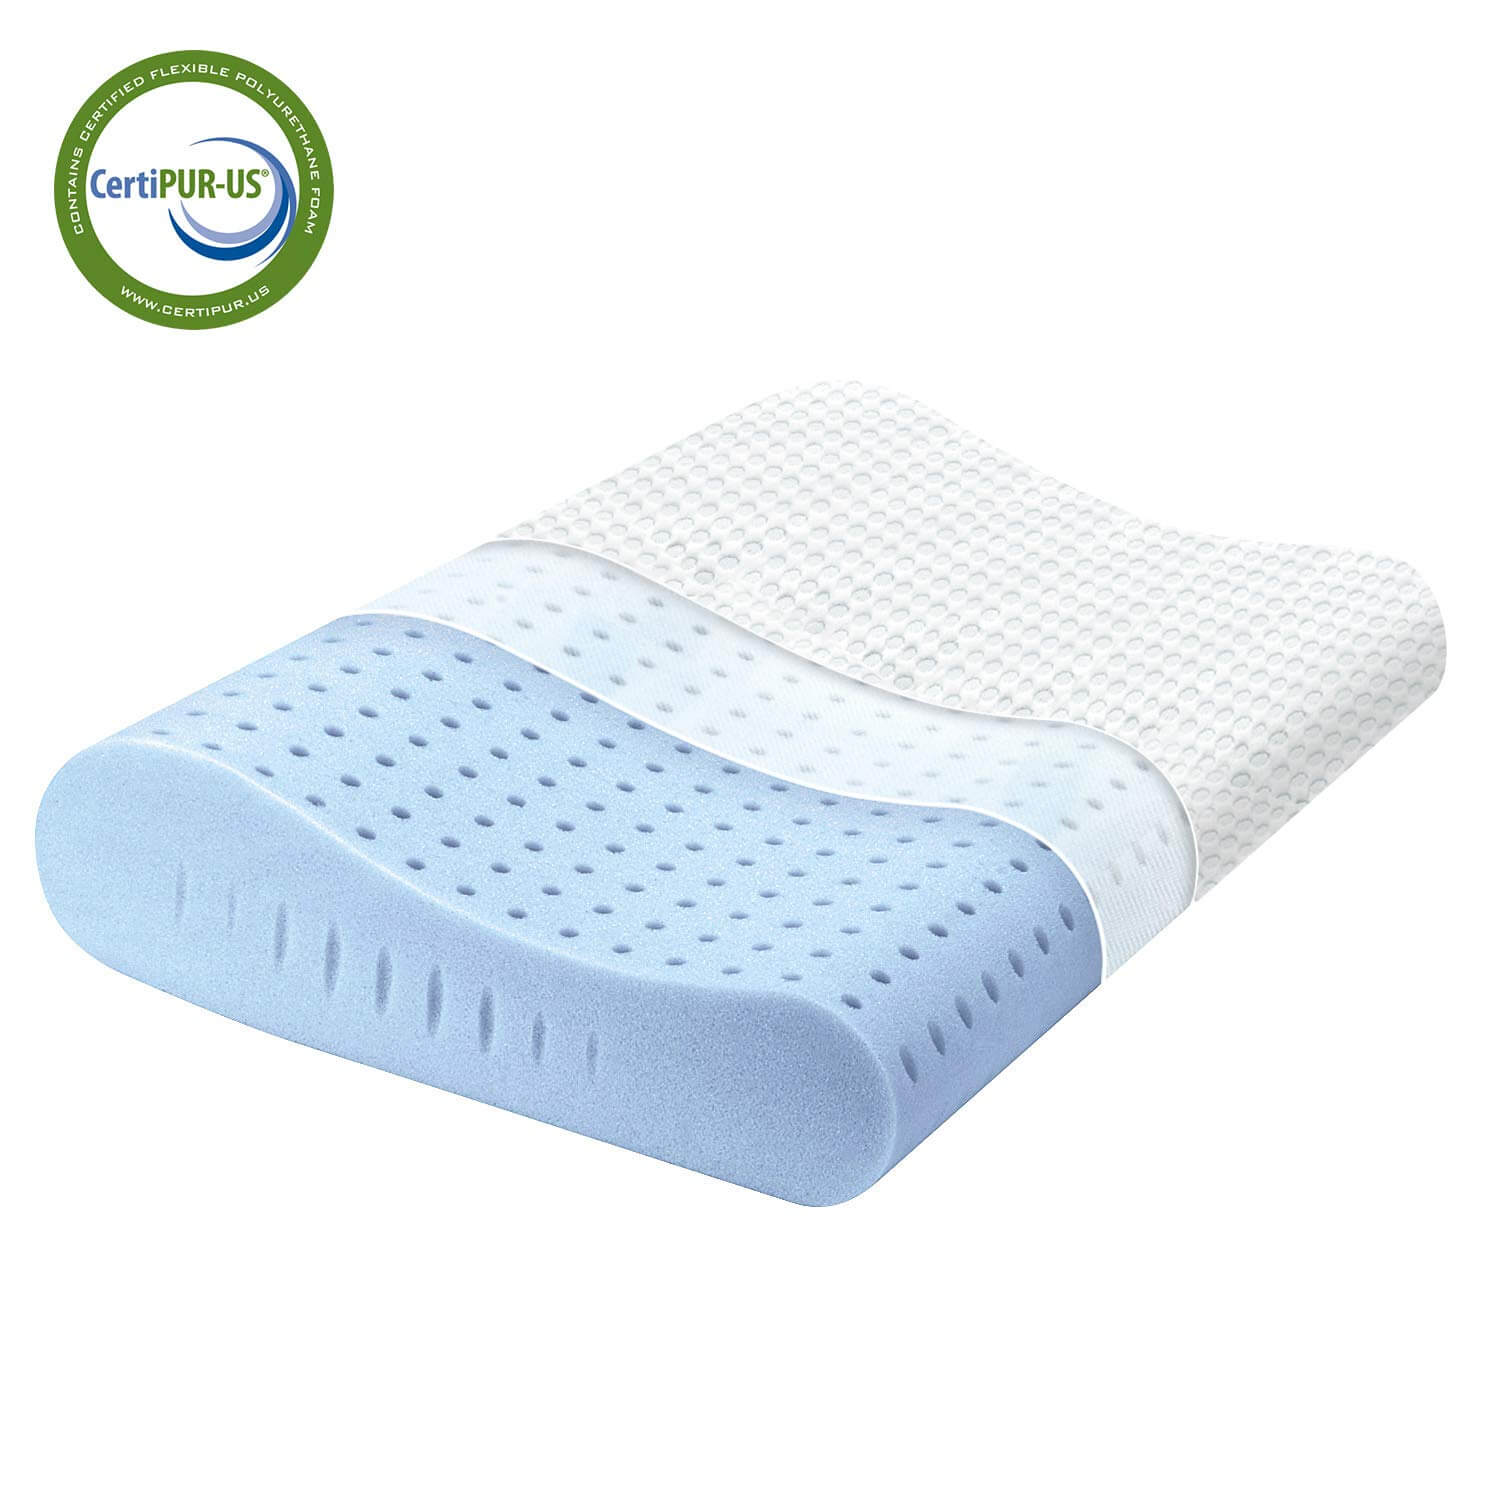 Milemont Memory Foam Pillow, Cervical Pillow for Neck Pain, Orthopedic Contour Pillow Support for Back, Stomach, Side Sleepers, Pillow for Sleeping, CertiPUR-US, Standard Size